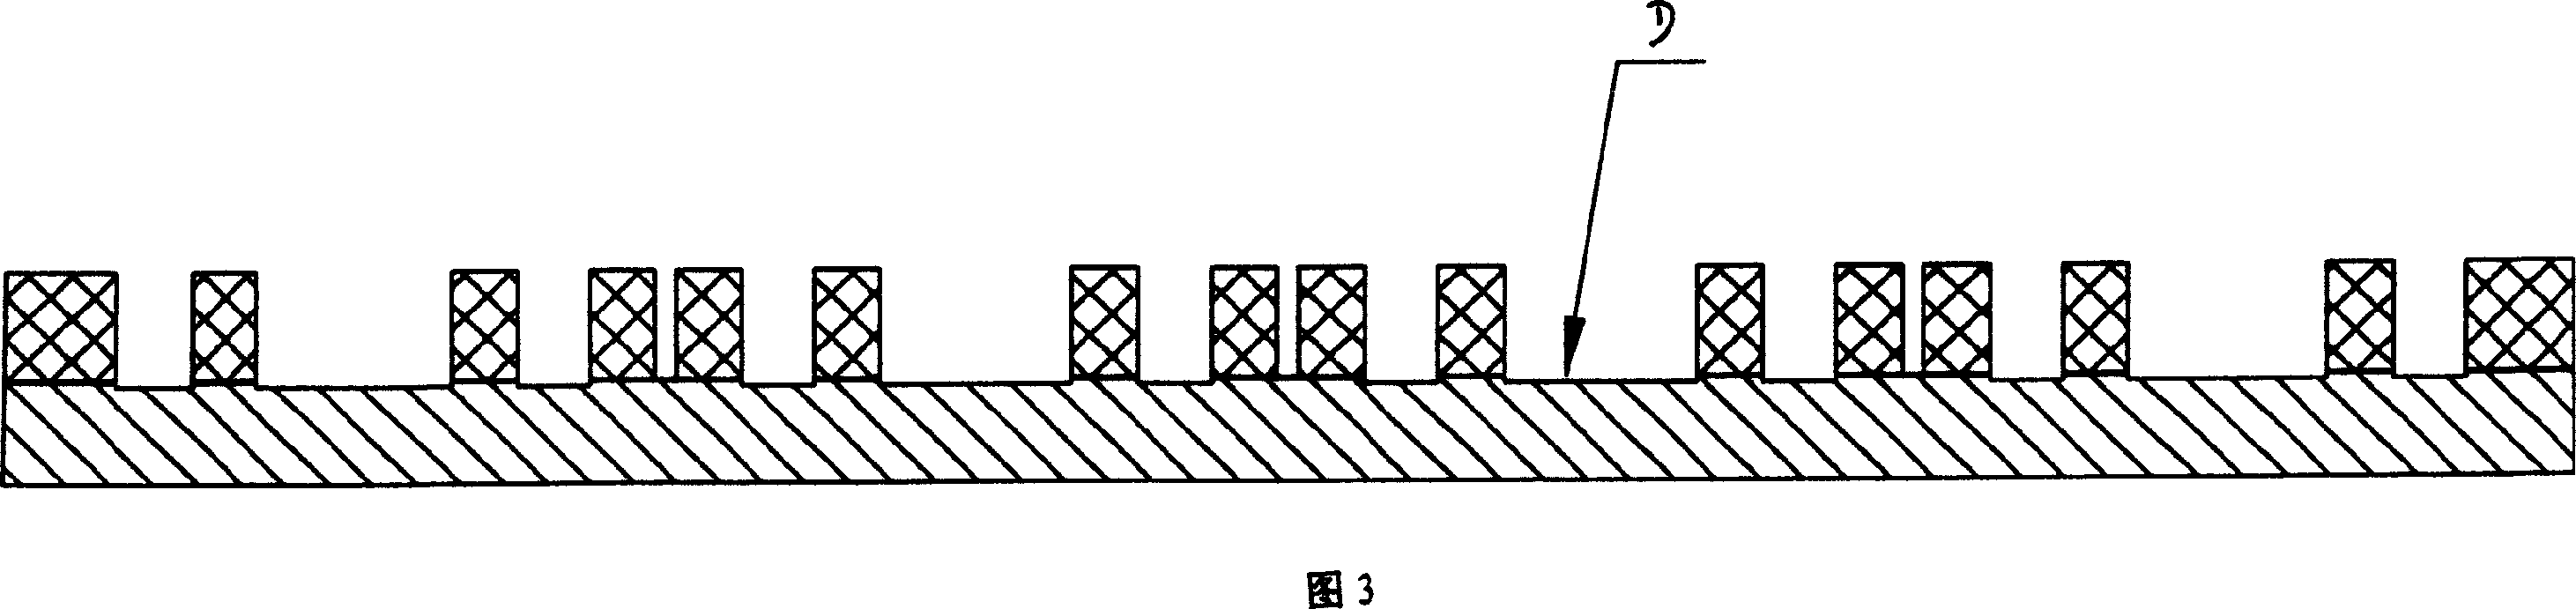 Lead frame for integrated circuit or discrete components ultra-thin non-pin packing